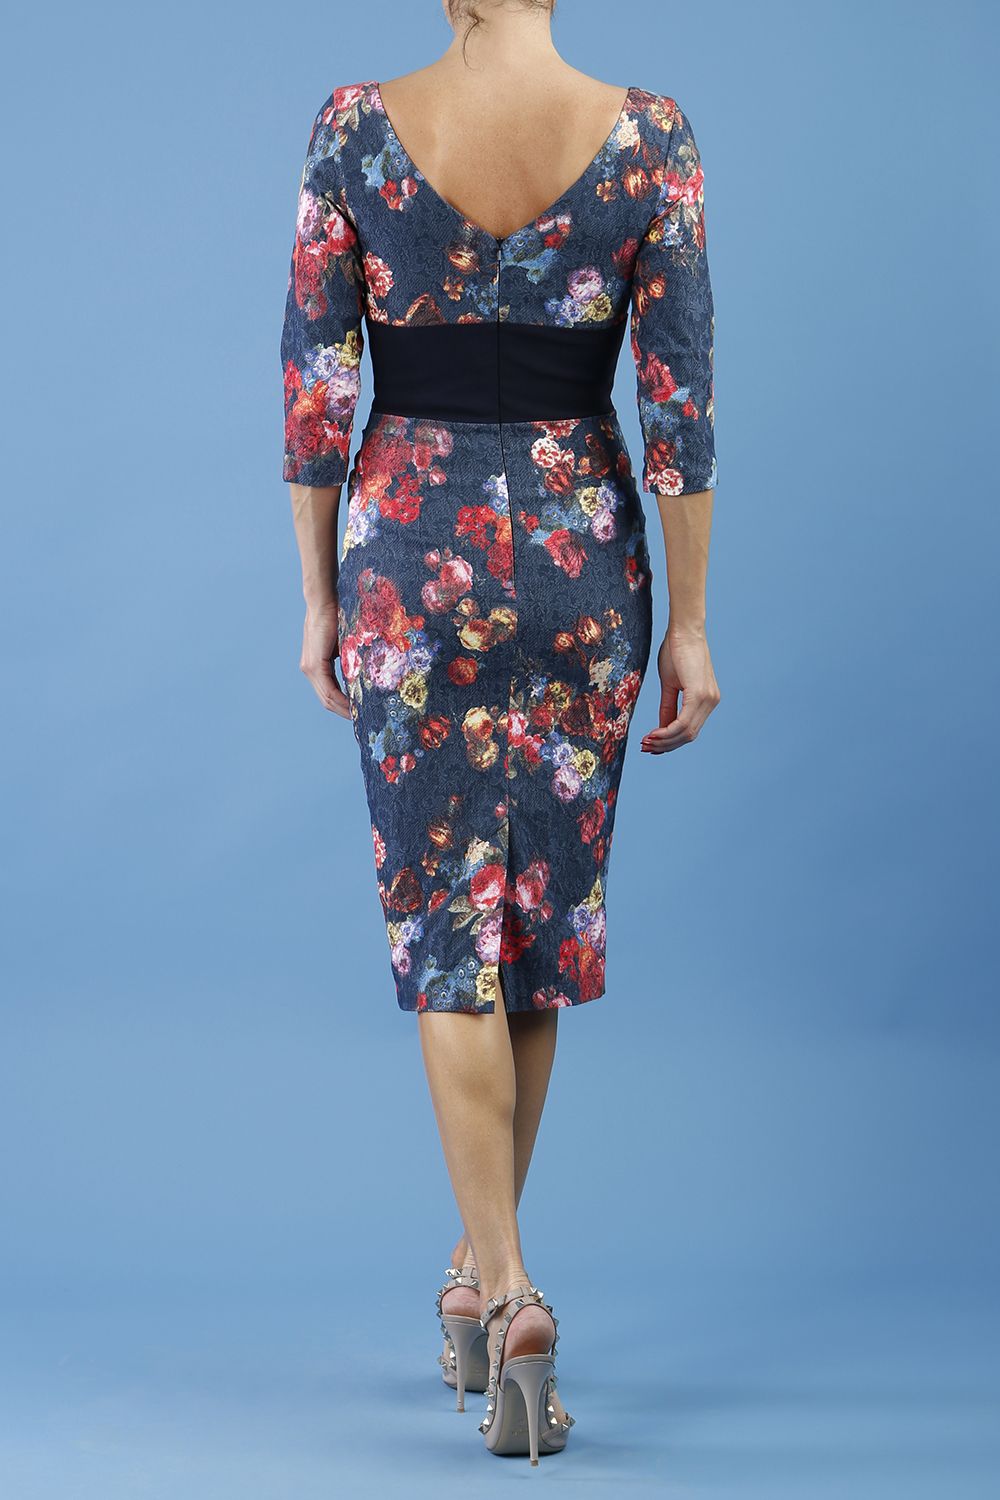 model is wearing diva catwalk stamford pencil dress with low v-neck and wide contrasting band in circle hidcote floral back